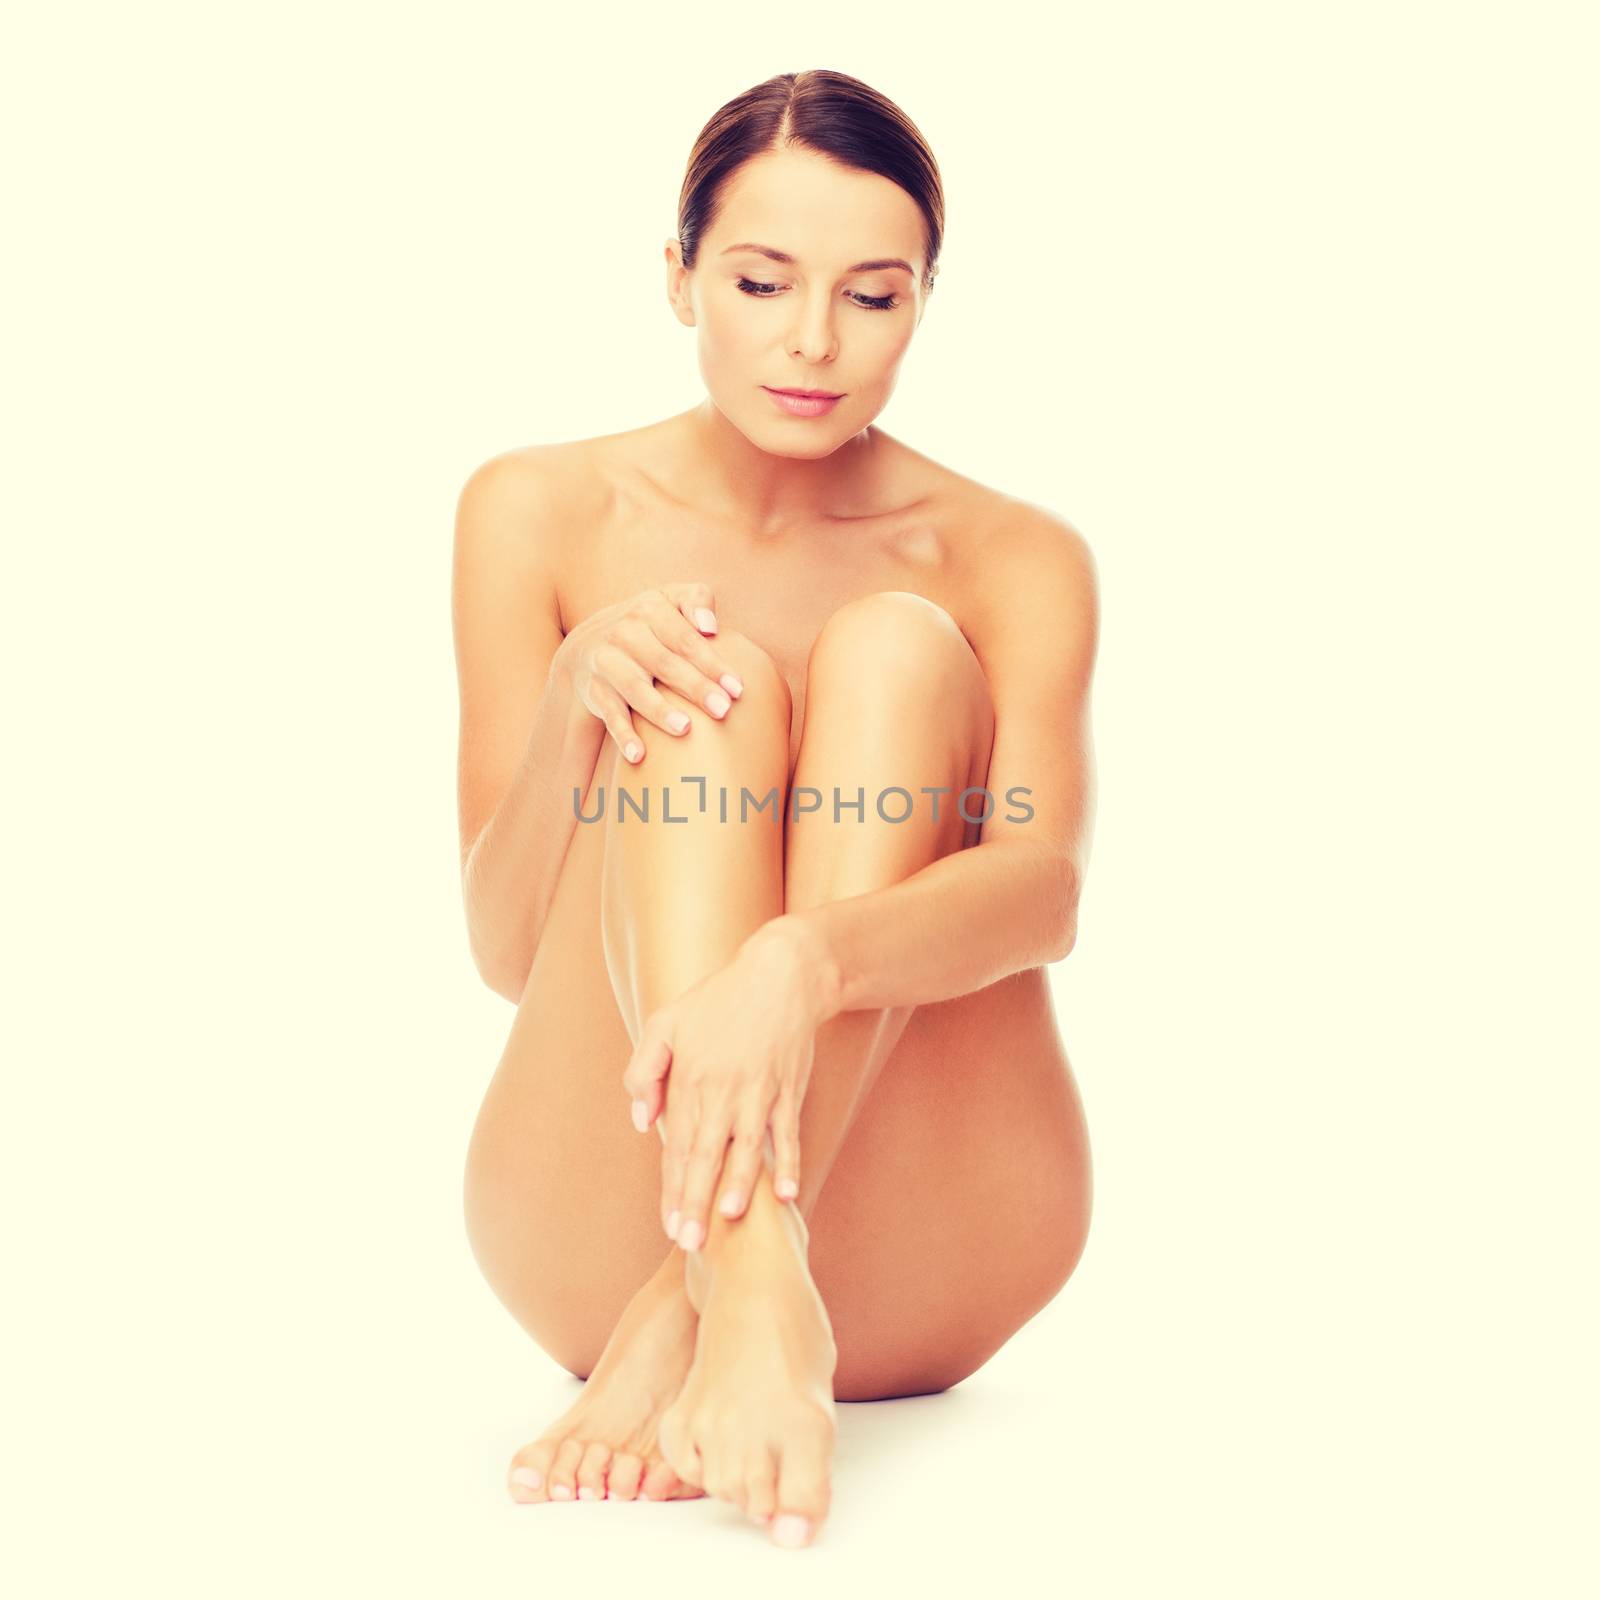 health and beauty concept - beautiful naked woman touching her legs